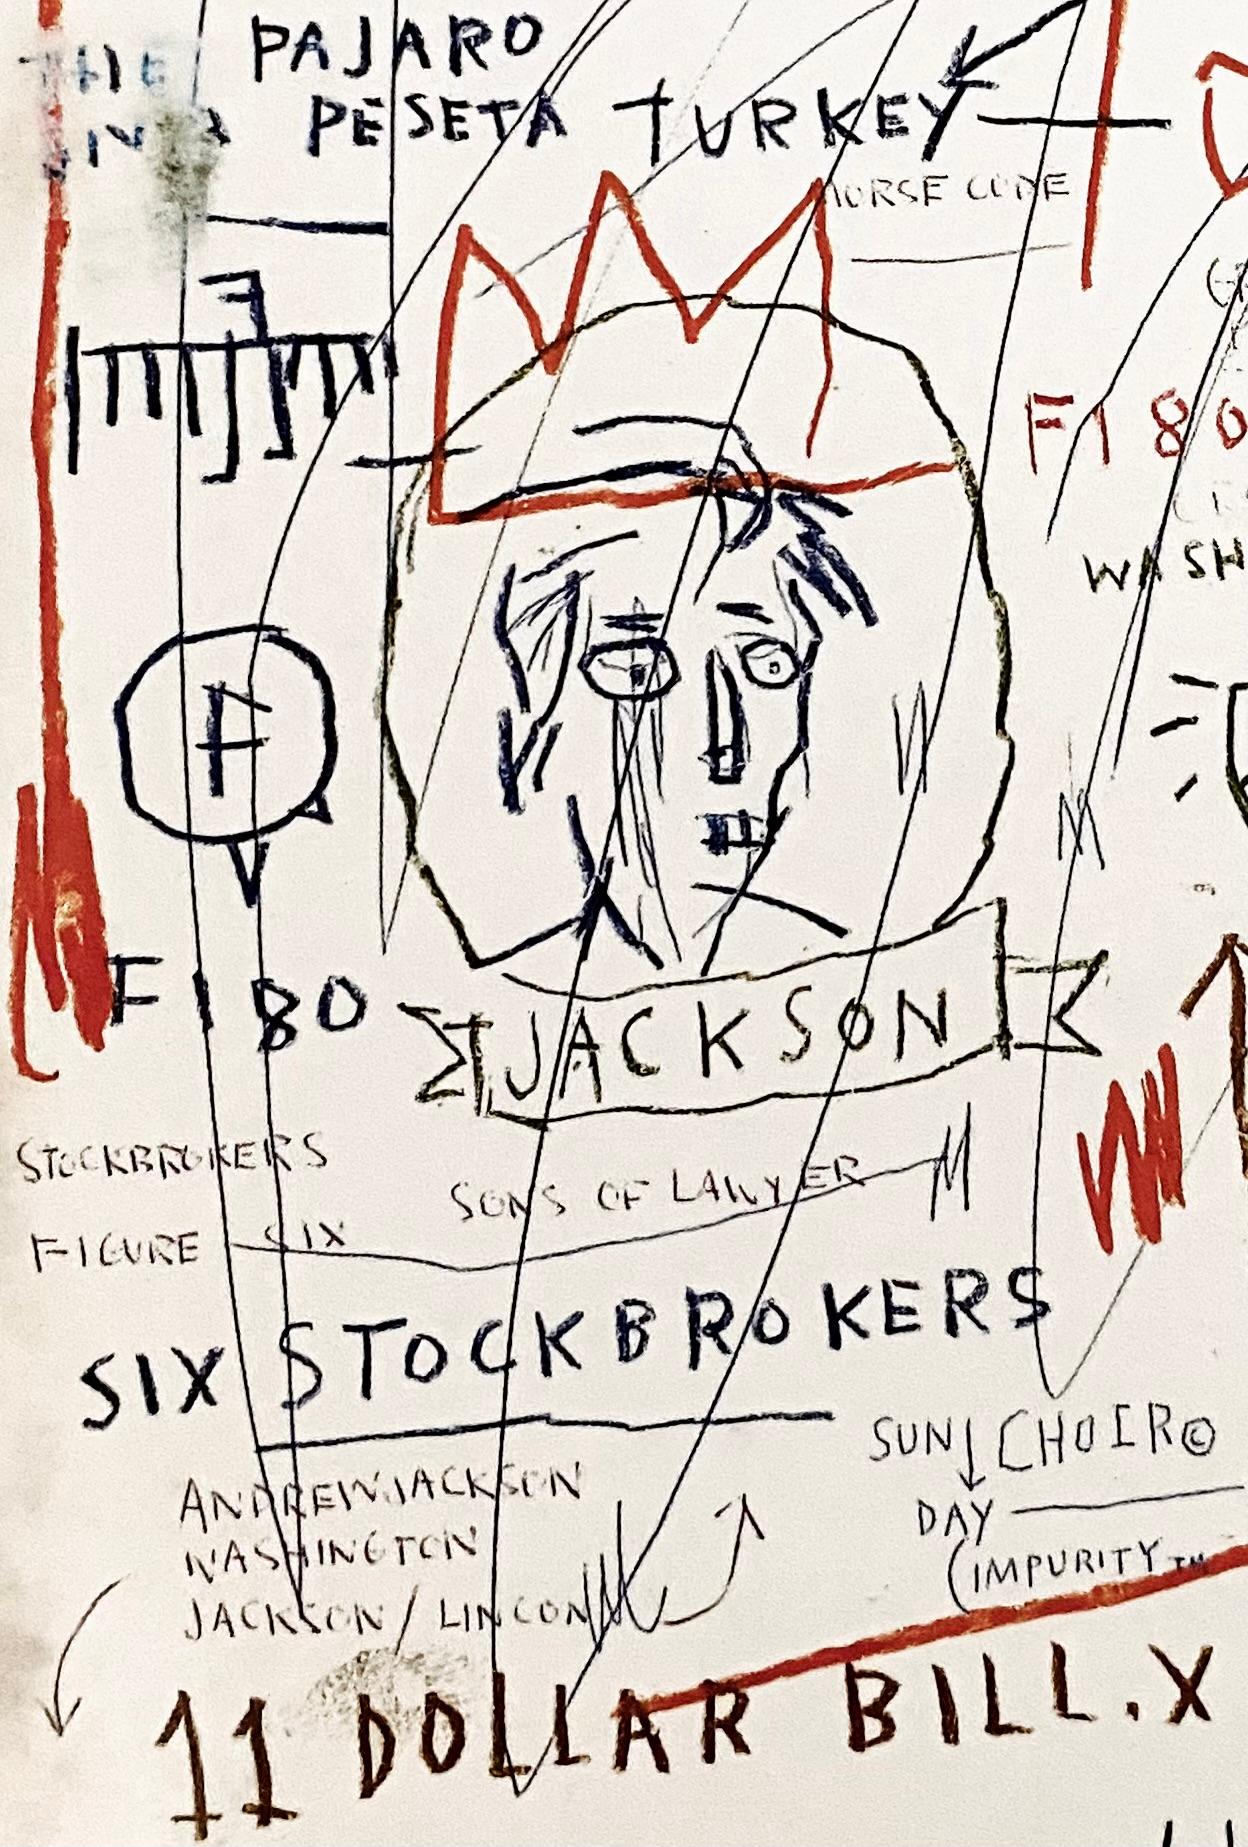 Jean-Michel Basquiat The Paris Review:
1989 The Paris Review book, featuring Jean-Michel Basquiat cover art. Imagery features a reproduction of Basquiat's (untitled) 1982 Jackson.

Offset lithograph on double sided art book. 
Measures approximately: